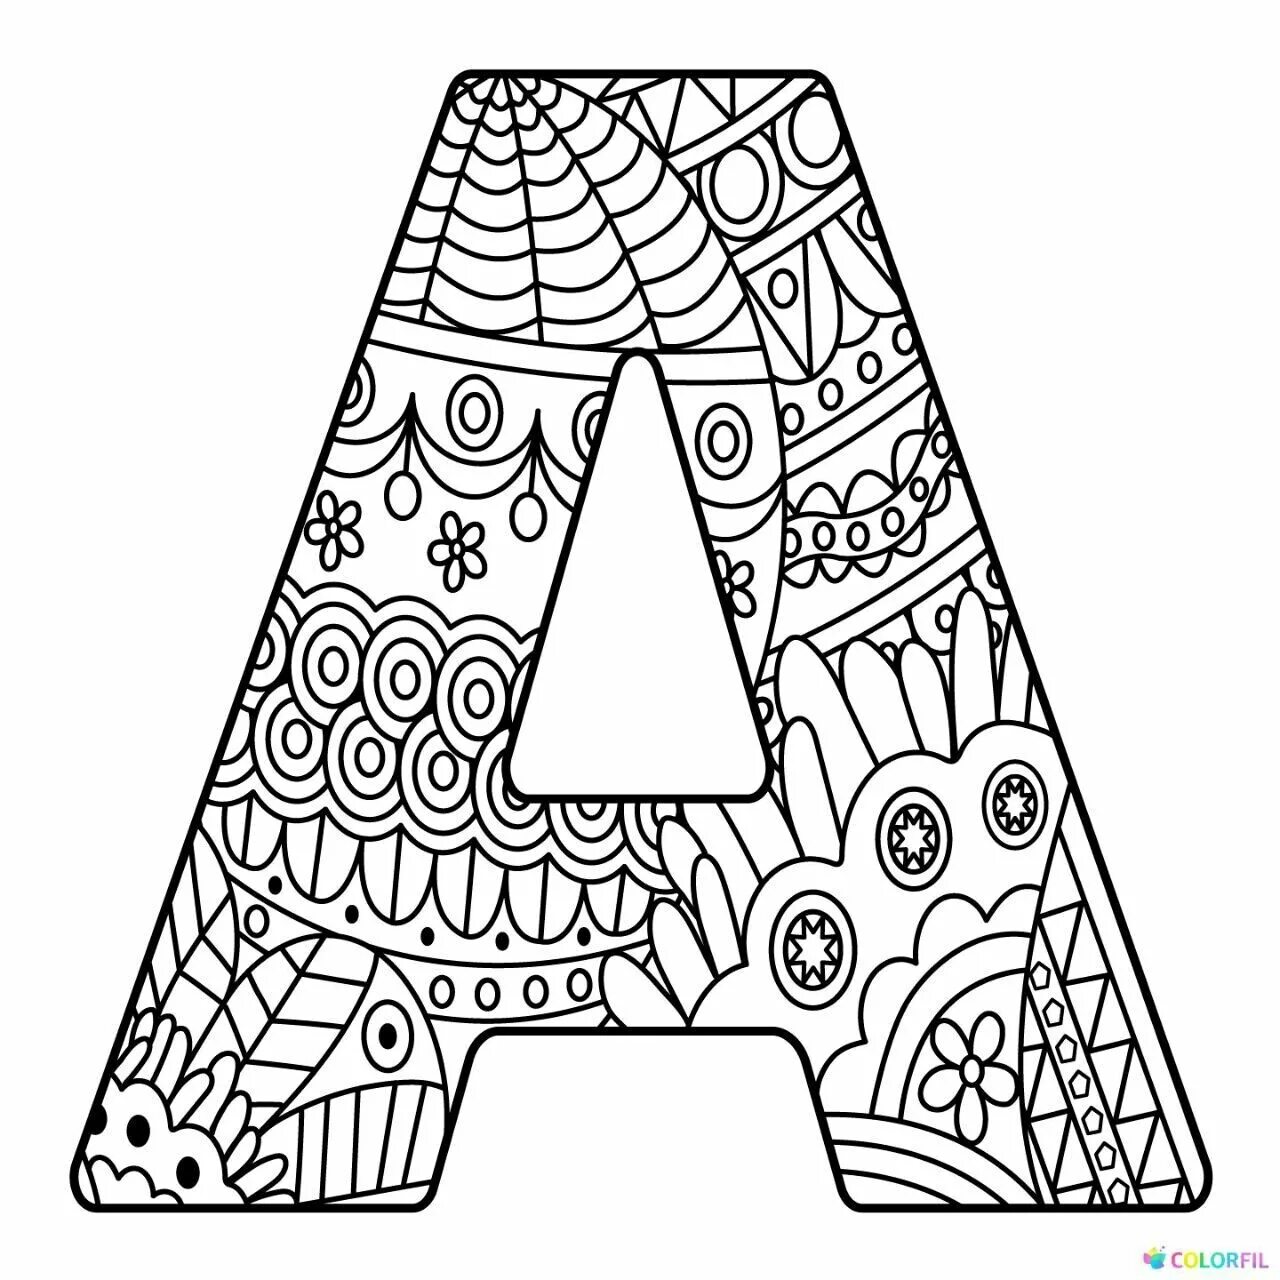 Coloring exquisite anti-stress letters